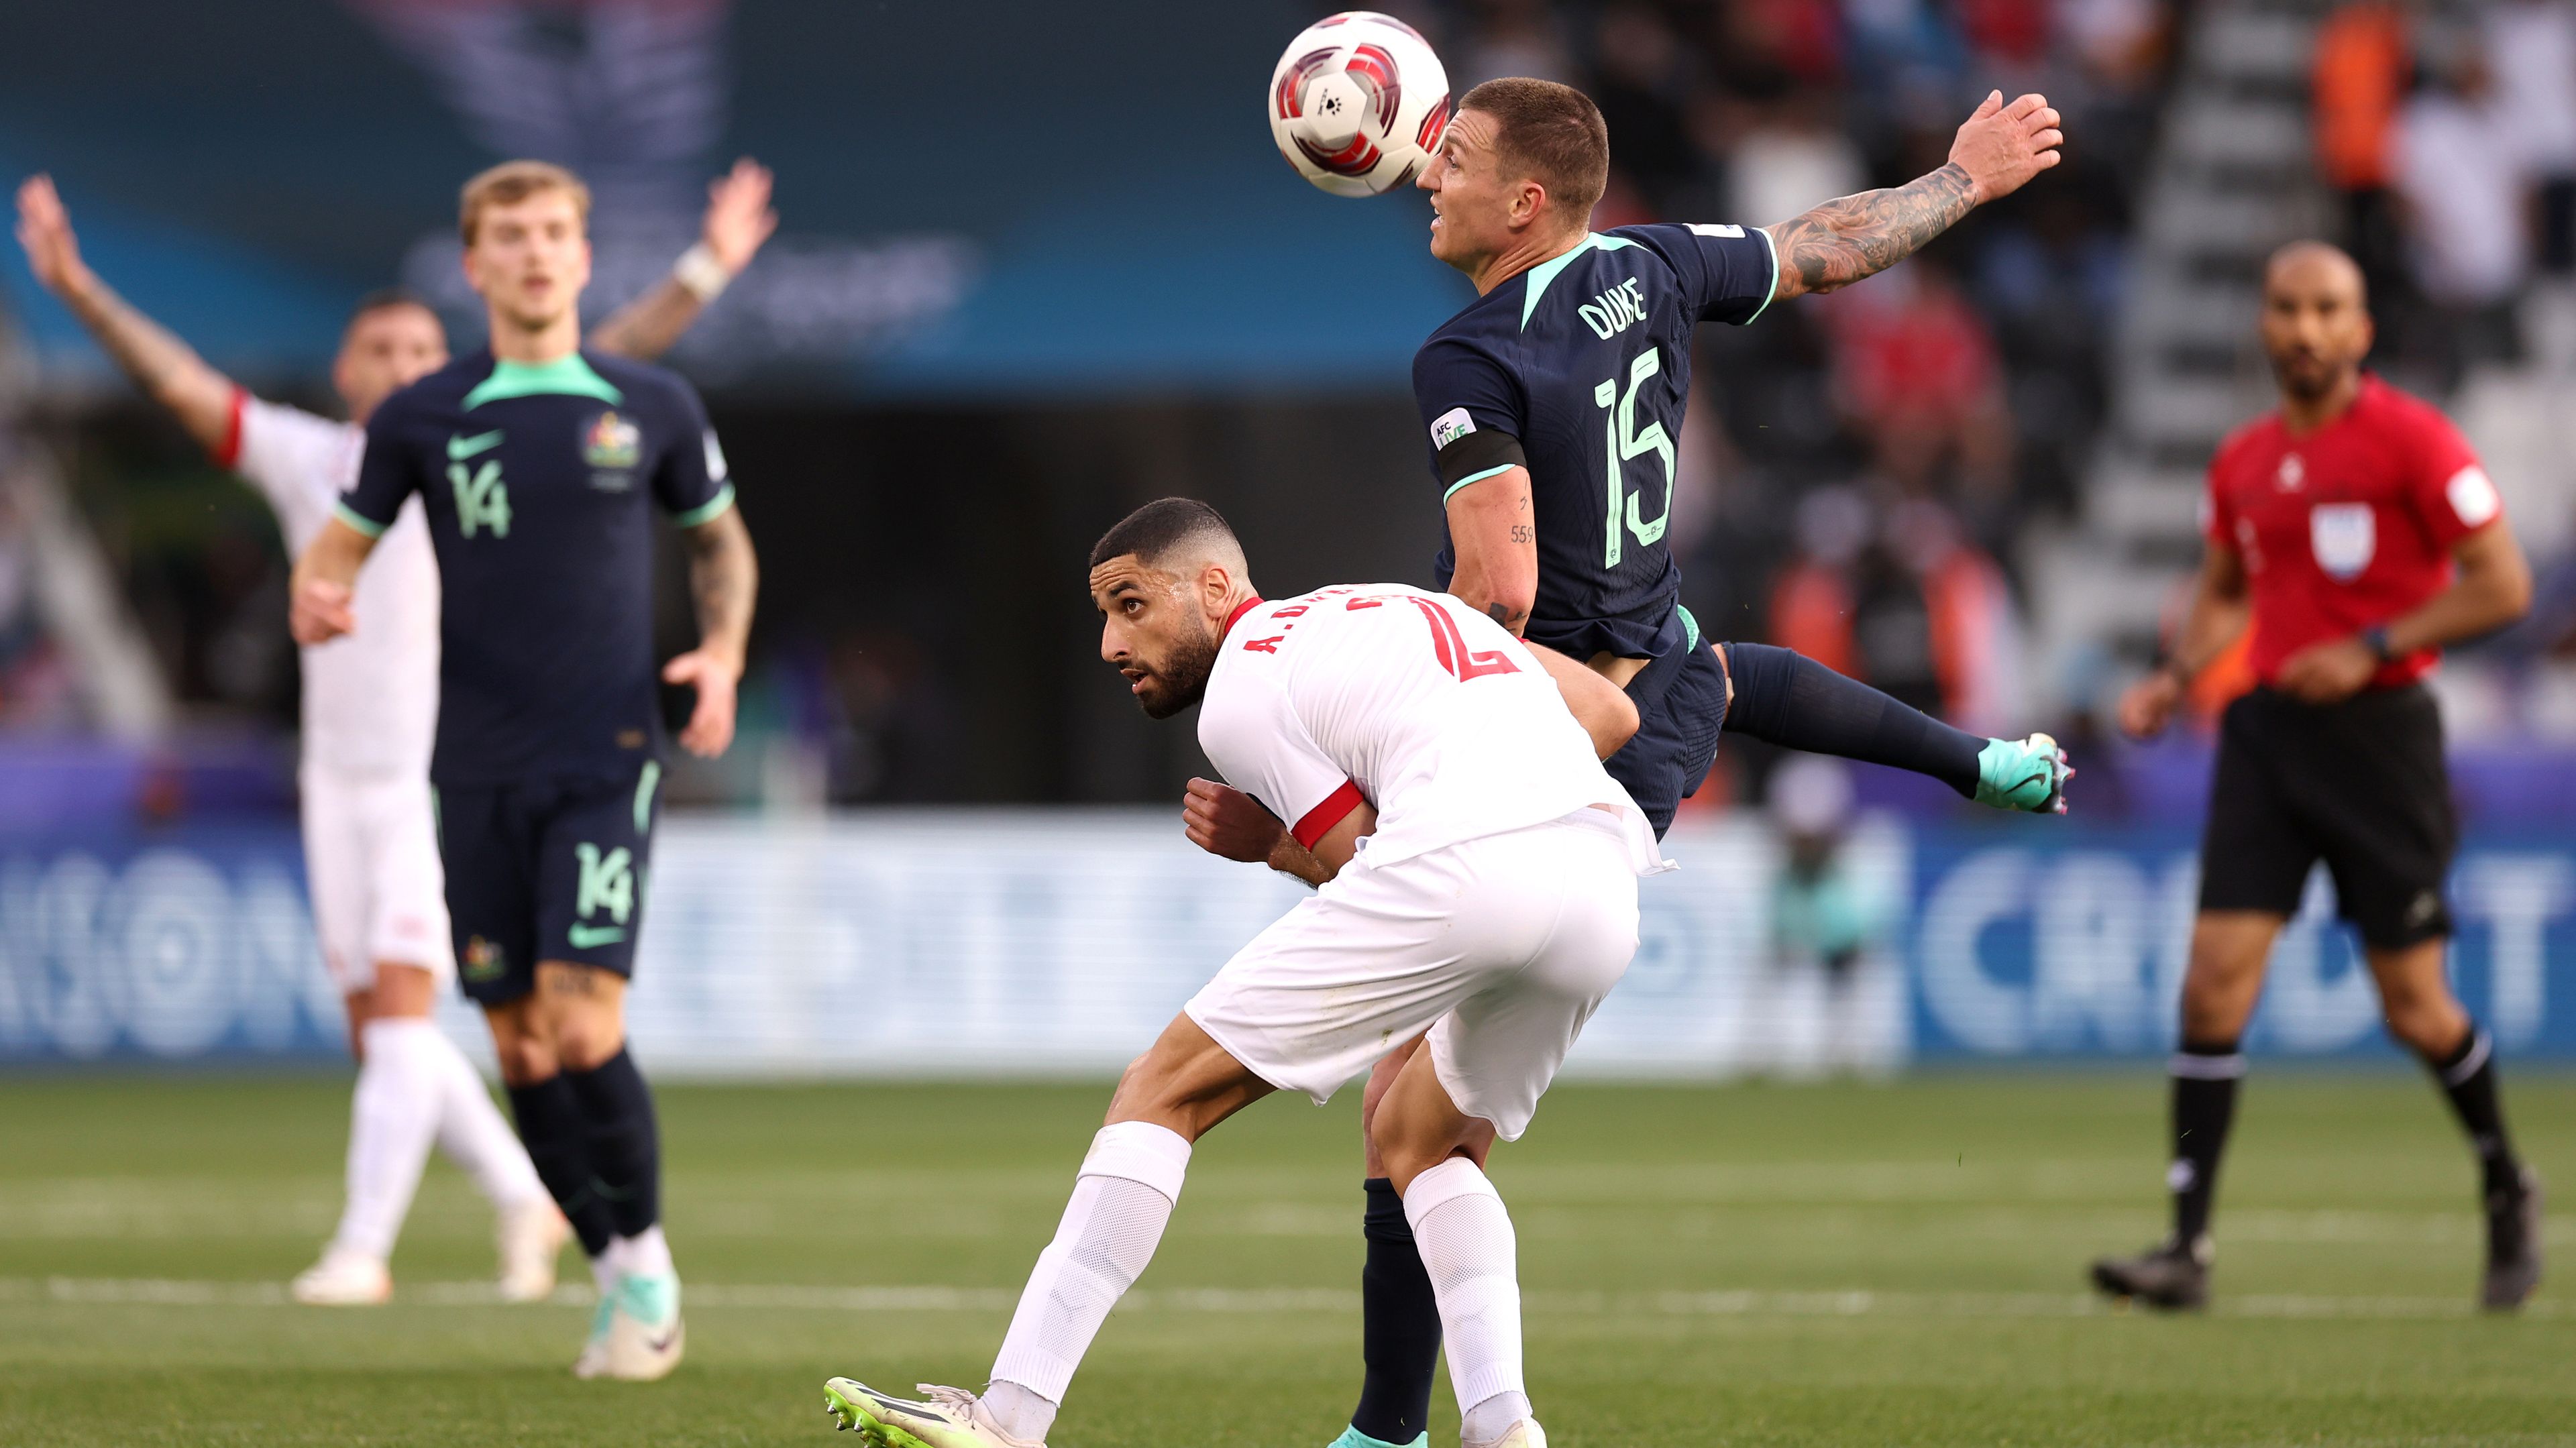 Mitchell Duke of Australia battles for possession with Aiham Ousou of Syria.